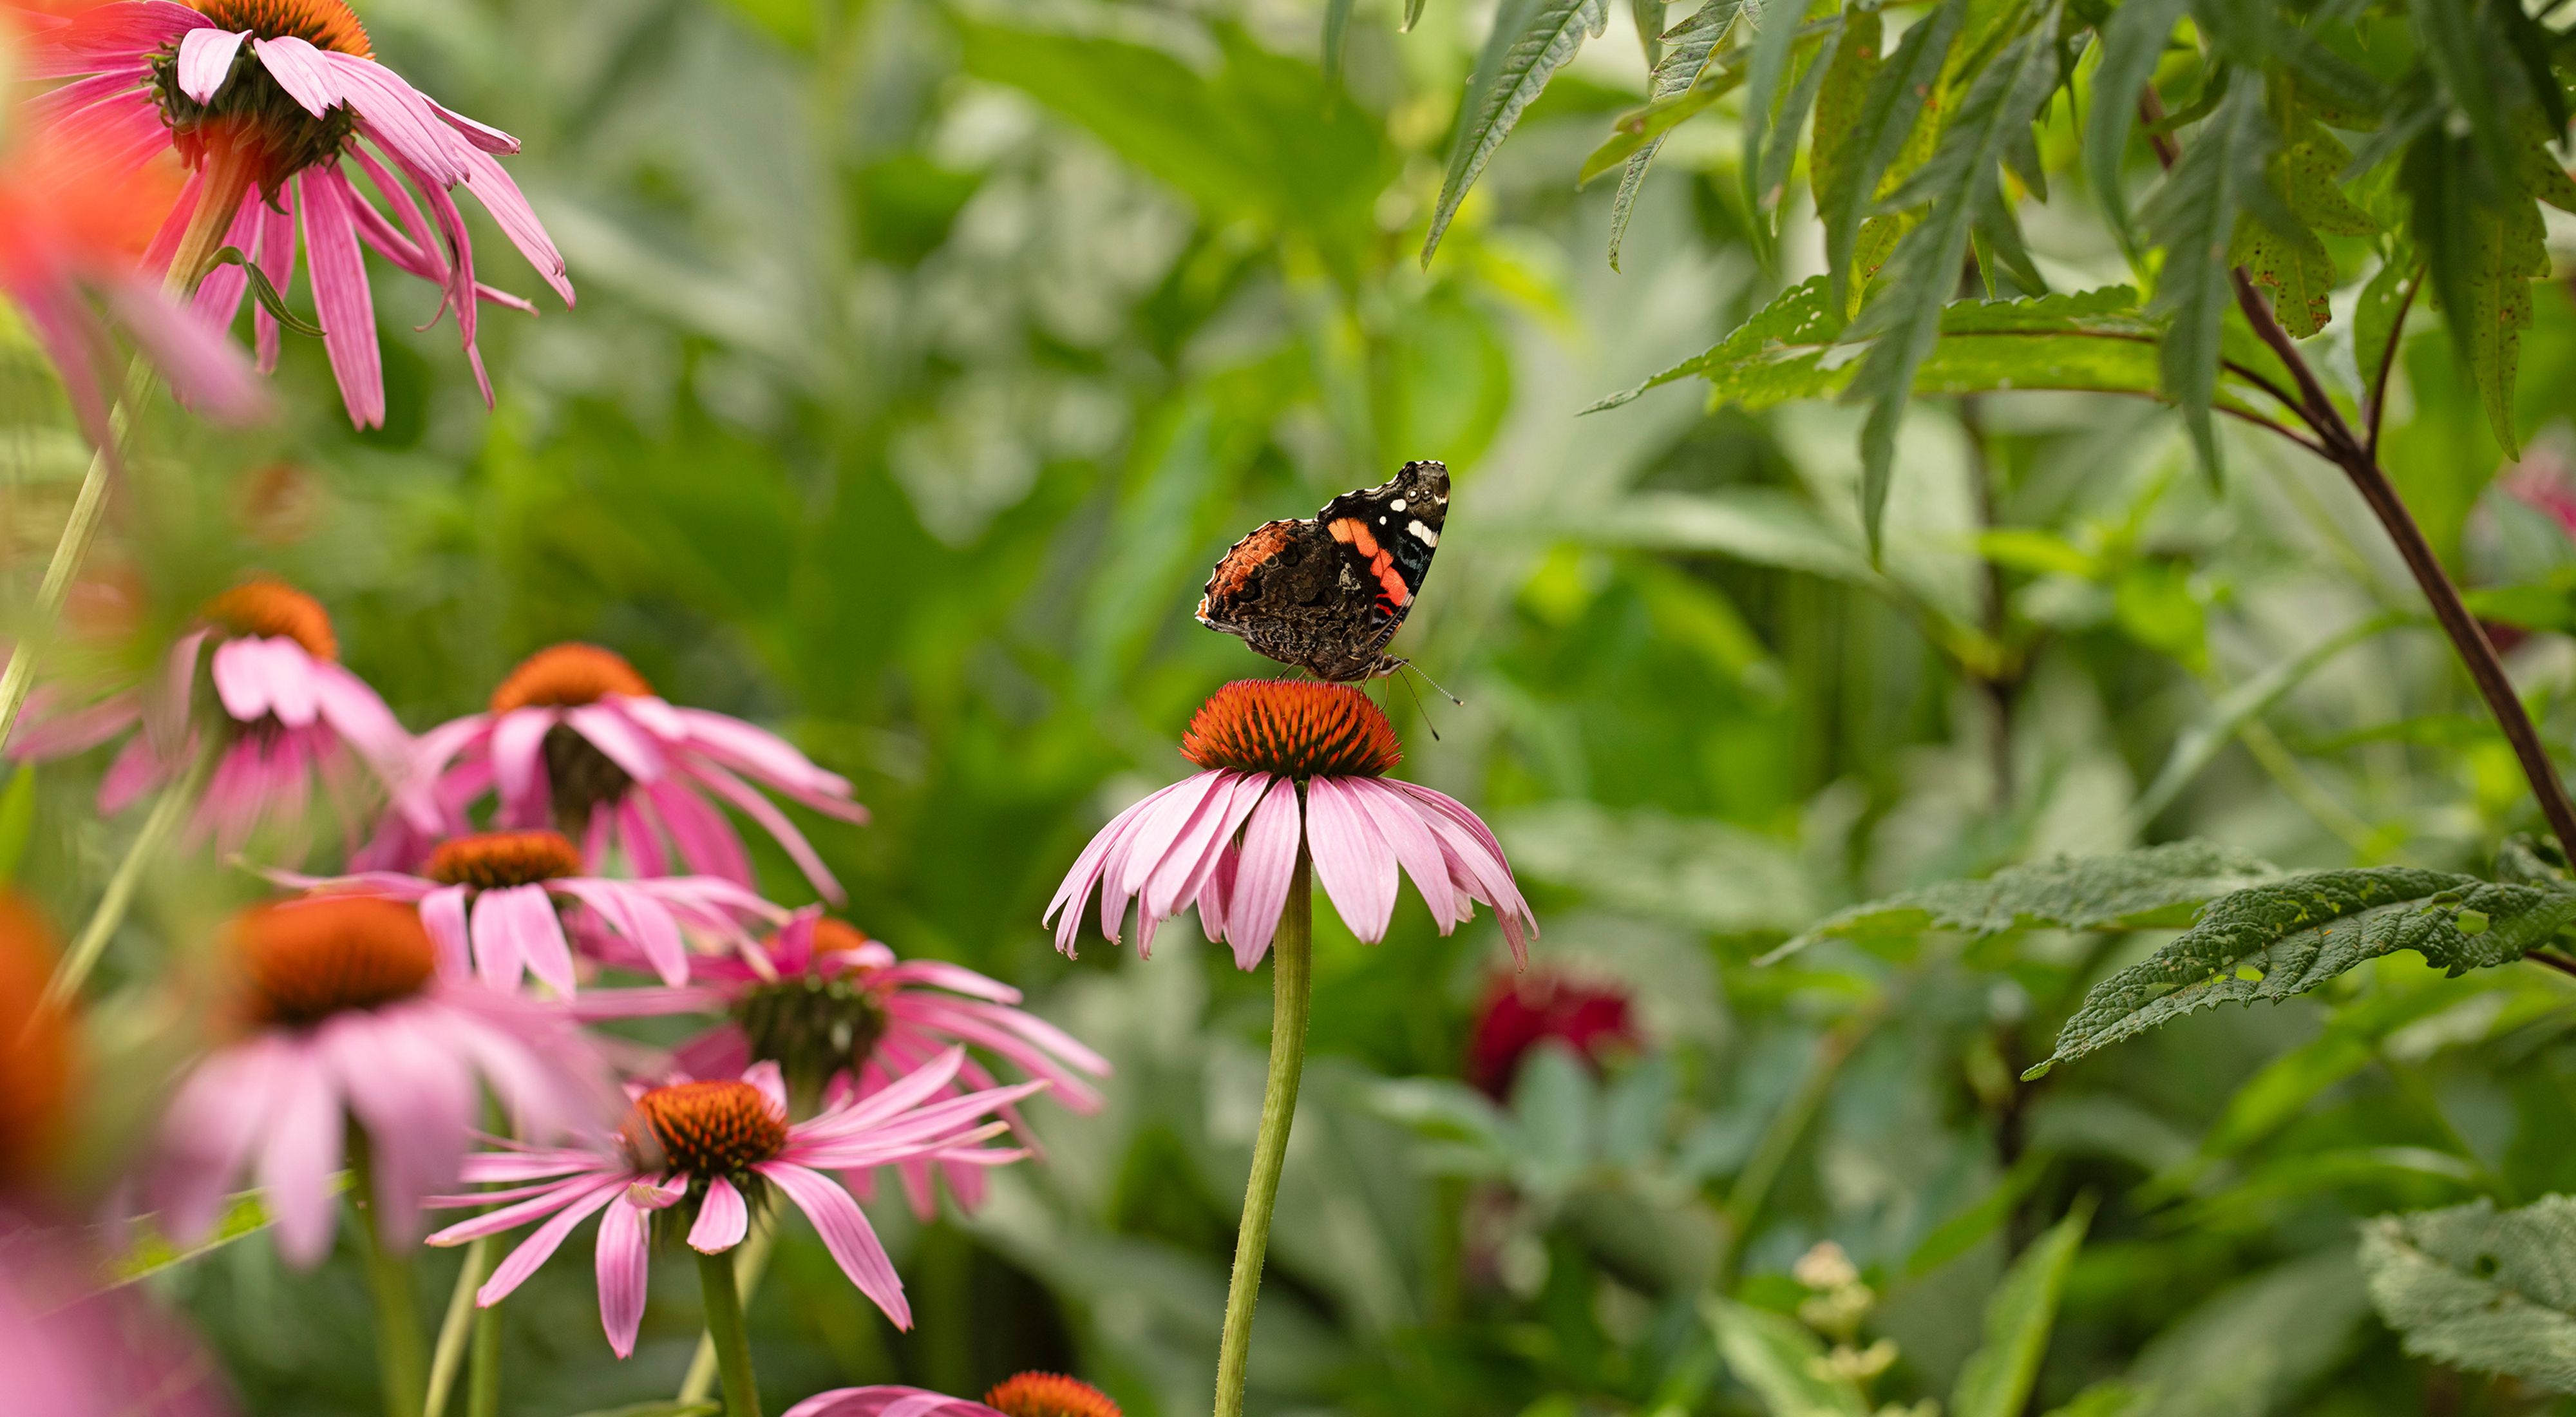 Painted lady butterfly on purple coneflower.